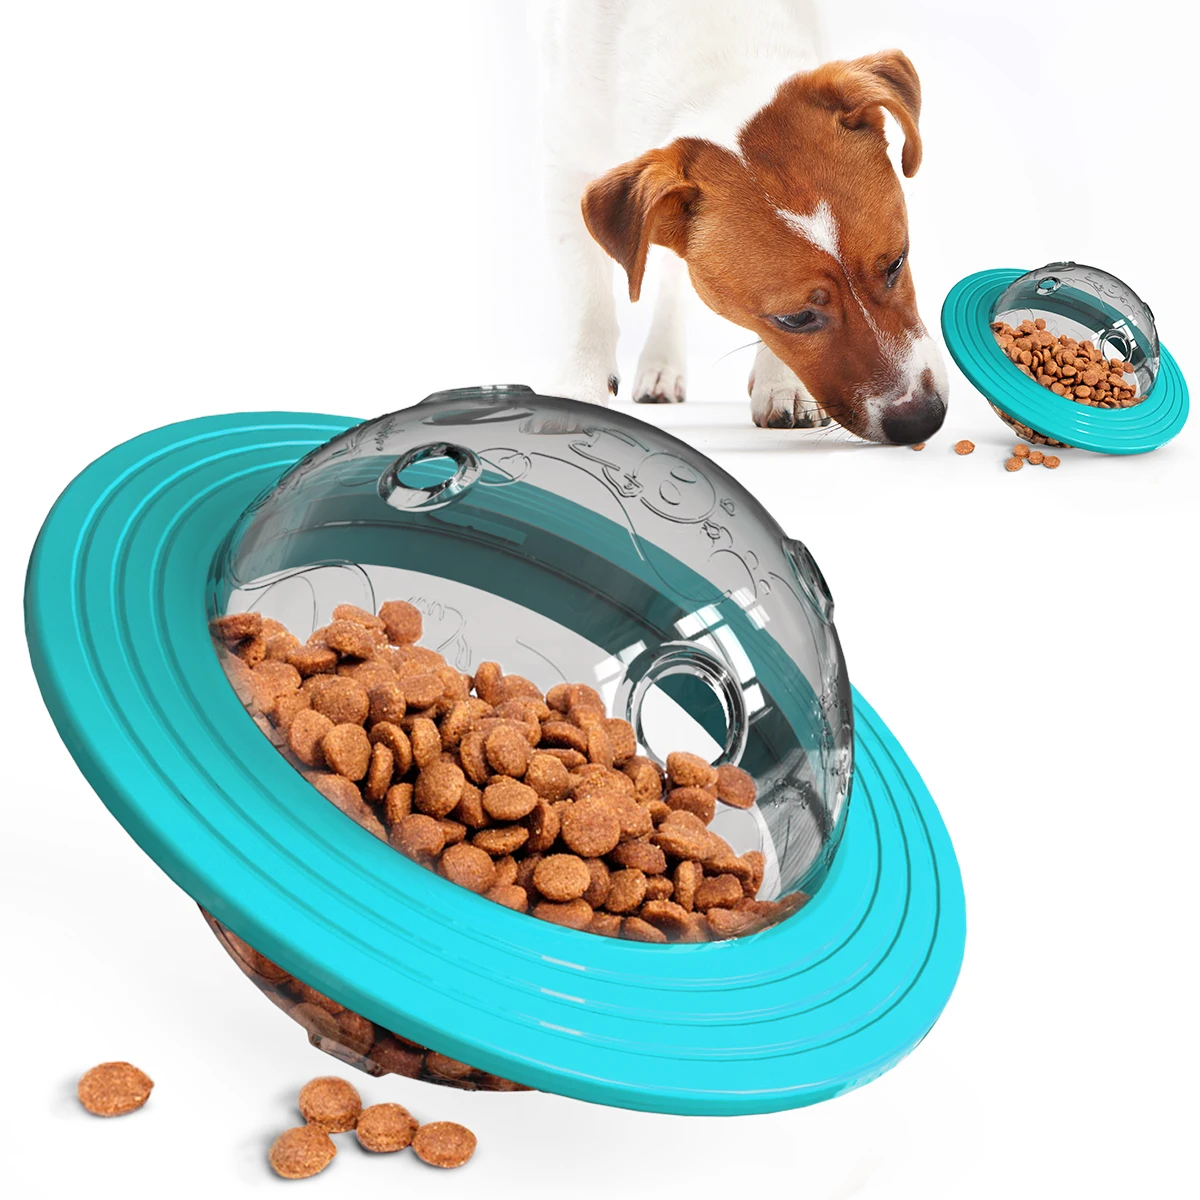 https://ae01.alicdn.com/kf/S245f8b8ecef3414a82cd10001d39f98e8/LEEDOAR-Pet-Supplies-Dog-Interactive-IQ-Training-Food-Leaky-Toy-Feeder-UFO-Dog-Slow-eating-Toys.jpg